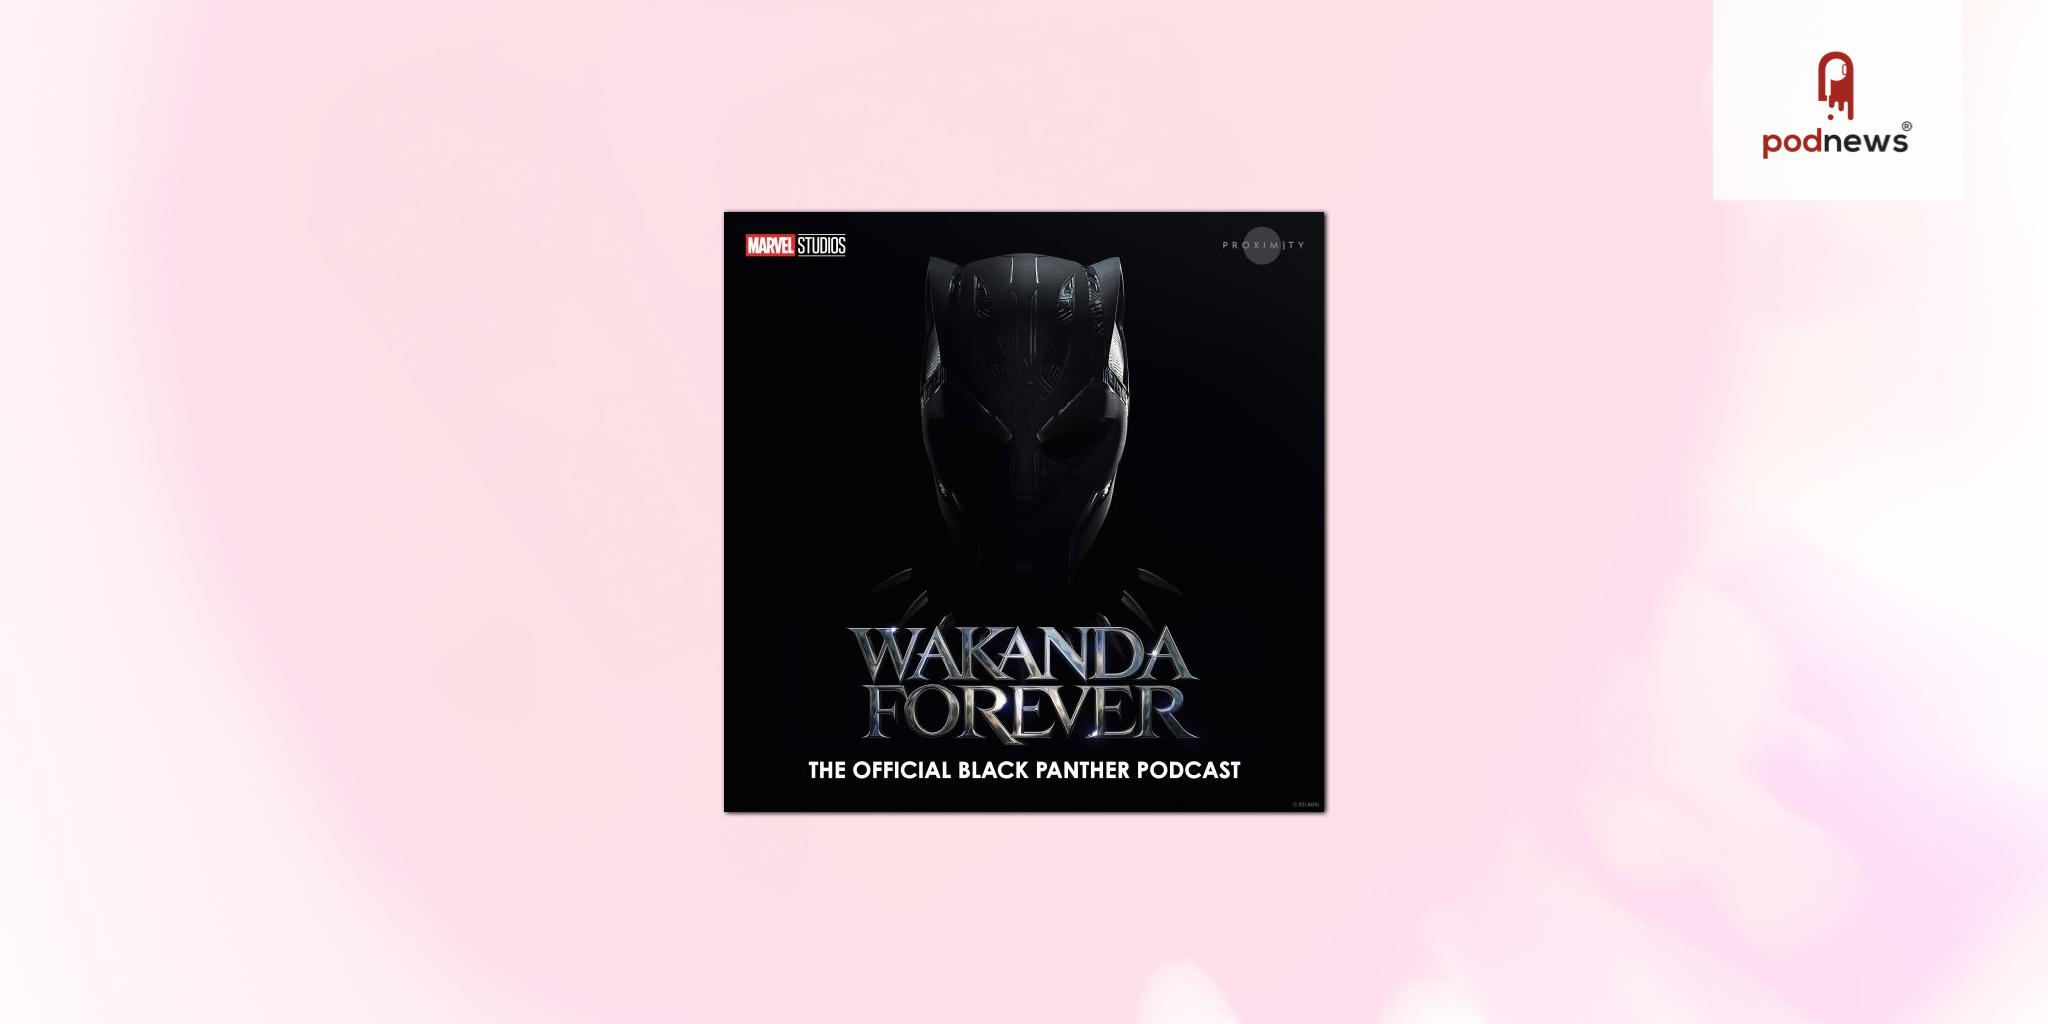 Proximity Media's first episode of Wakanda Forever: The Official Black Panther Podcast, debuts today